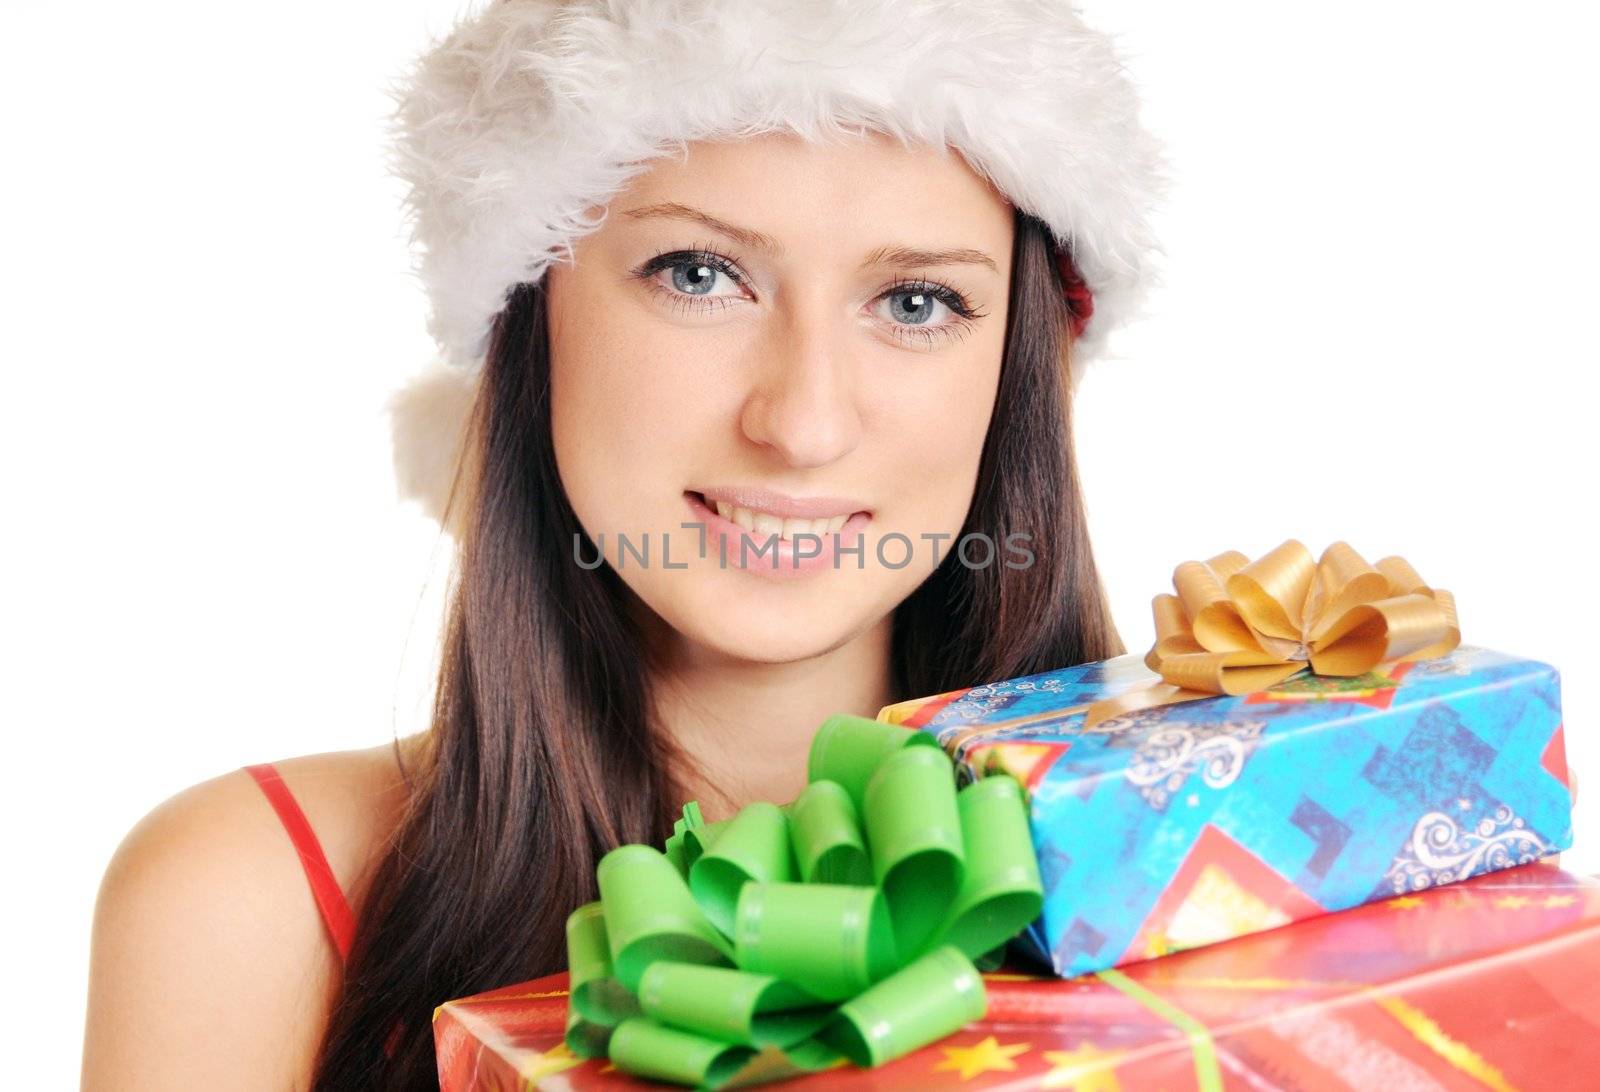 Beautiful christmas girl over white background